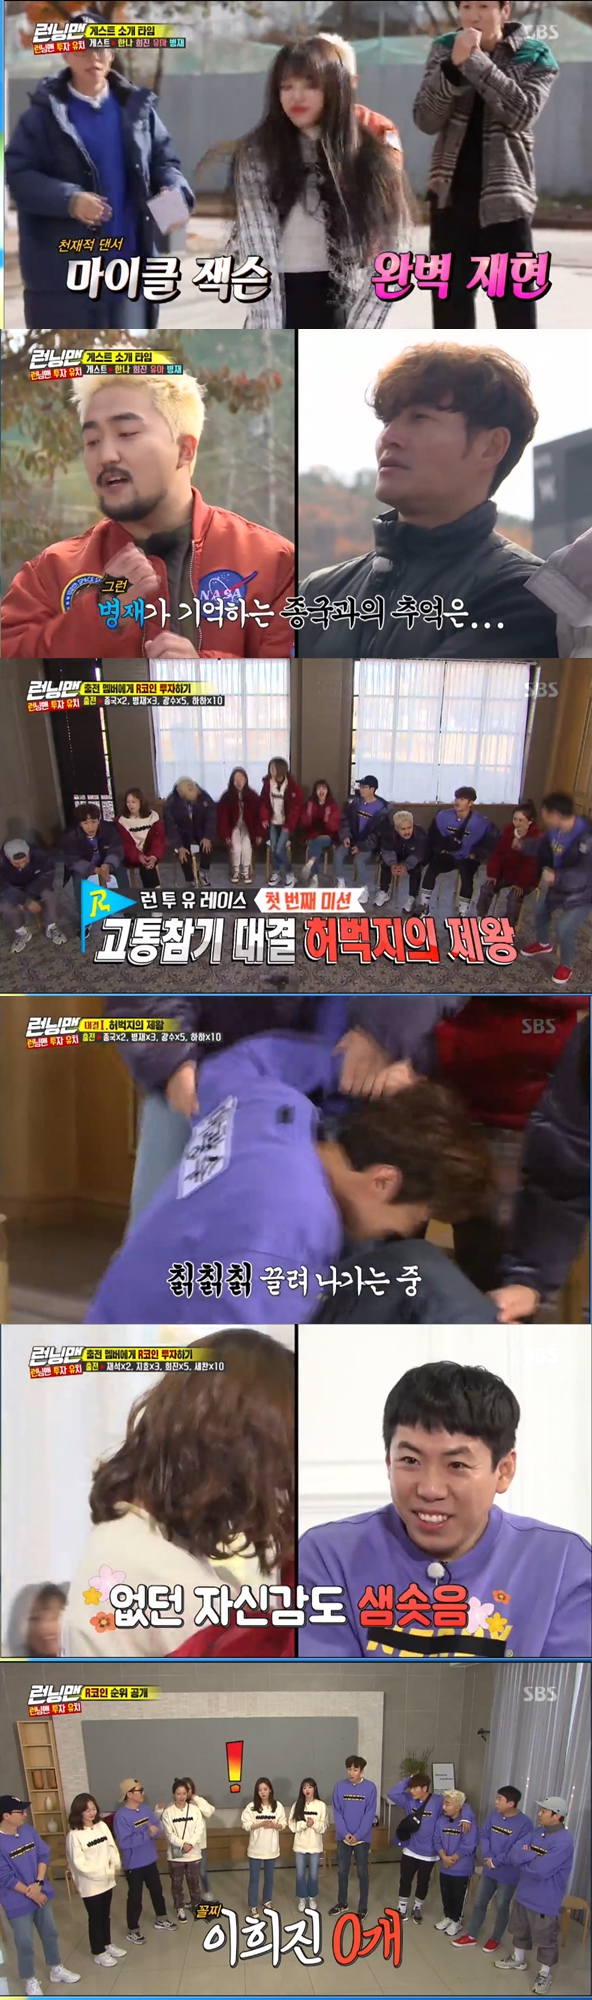 The guest was penalized alone.In the SBS entertainment program Running Man broadcasted on the 8th night, Kang Han-Na, Baby V.O.X Lee Hee-Jin, Oh My Girl YooAAAAAAAAAAAAAA, Yoo Byung-jae came out as guests and performed Running Man Investment Race with members.In the opening, Kim Jong-kook asked YooAAAAAAAAAAAAA Jae-Suk, who is in the Edge of the City, Why is the main MC in the Edge of the City?YooAAAAAAAAAAAAA Jae-Suk said, The place where I am is the center soon.Kim Jong-kook told YooAAAAAAAAAAAAA Jae-Suk about the place because of Haha.Kim Jong-kook, who was betrayed by Hahas lies in last weeks recording, was determined to treat Haha as an invisible person.Kim Jong-kook drove Haha to YooAAAAAAAAAAAAA Jae-Suk, saying, Is not there anyone next to you?Haha said he was sorry and ran next to Kim Jong-kook, but Kim Jong-kook laughed at Ji Suk-jin, who was next to him, saying, Why do you leave a lot of space?YooAAAAAAAAAAAAA Jae-Suk then mentioned Yang Se-chans birthday and said, Jeon So-min may prepare for the event, making Yang Se-chan look forward to it.The members were enthusiastic when Lee Hee-Jin, a baby boxer, appeared; Lee Kwang-soo cheered, Ive never seen Baby V.O.X.YooAAAAAAAAAAAAA Jae-Suk asked her about her recent situation and asked, Why did not you get a bouquet at the Kan Mi-yeon wedding?Lee Hee-Jin said, I heard that if I get the bouquet, I should get married within six months.She then revealed her ideal type, such as a man who does not cheat and concentrates on her work.Jeon So-min, who heard this, looked at Yang Se-chan and mentioned Lee Hee-Jins ideal type and laughed, saying, Do you understand?Lee Hee-Jin then received a big applause and cheers by reproducing the Baby V.O.X stage with his junior Omai Girl Yui.Yoo Byung-jae has been on Running Man for a long time and has appeared = and showed off his long-term three-run.YooAAAAAAAAAAAAA Jae-Suk asked YooAAAAAAAAAAAAA Byung-jae to give him a third act, and YooAAAAAAAAAAAAA Byung-jae readily accepted.He sympathized with Yang Se-chan, who noticed that Yang Se-chan was a brother of Yang Se-chan, Yang Se-chan is a cold rice following Ji Suk-jin 3 act.YooAAAAAAAAAAAAA Jae-Suk pointed out that it did not burst a little before, and made Yoo Byung-jae notice again.This week, Race was penalized by the person with the least RCOIN in the final race through investment.Members were able to inflate COIN by investing RCOIN in members who played in each round.Kim Jong-kook was the lowest dividend rate in the first event, and Haha was the highest member.The members started to bet on each other after making various speculations about the stocks only by dividend rate.The first event to be built on the veil was Hump Pain Suffrage. Even Haha, who had the highest dividend rate after hearing the event, admitted, The viewers are really accurate.Lee Kwang-soo heard that there was one person who voted for him and said, I will endure unconditionally for one.But in the first event, there was Kim Jong-kook who did not feel pain.Lee Kwang-soo tried to avoid Kim Jong-kooks side, but Kim Jong-kooks side turned around and became the charge of YooAAAAAAAAAAAAA Jae-Suk.As soon as Kyonggi started, Haha was eliminated from the first period, as was the highest dividend rate.Lee Kwang-soo also dropped out of the game with a low sound as soon as Kim Jong-kook hit him unlike his firm will.Eventually, as everyone expected, Kim Jong-kook took first place, and the four members who bet on him won twice as much COIN.Then the meal mission began. The members teamed up with six members to kungkungkwa the food name.The YooAAAAAAAAAAAAA Jae-Suk team, which challenged first, handed the opportunity to Kim Jong-kook team with a ridiculous mistake by the first runner Ji Suk-jin.But Kim Jong-kooks team also missed the chance and the game went back to square one; the production team re-suggested the longer-running team as winning.The Kim Jong-kook team won the game as a result.In the second event after lunch, YooAAAAAAAAAAAAA Jae-Suk received the lowest dividend and Yang Se-chan received the highest dividend.Jeon So-min, who went out to pay dividends, looked at Yang Se-chan and asked, Are you there?Yang Se-chan proudly replied, I am confident, and Jeon So-min put five COINs on Yang Se-chan for Yassechan.The second event was the King of the Quiz where YooAAAAAAAAAAAAA Jae-Suk was strong. The first question was King Sejong. Song Ji-hyo, who got the chance, surprised everyone.However, in the opportunity that followed, I could not get the right answer and could not get out of the quiz hole.Without such a big difference, YooAAAAAAAAAAAAA Jae-Suk won, and Haha, Gwangsu and Byeongjae earned twice as much COIN.The last Battle received the lowest dividend for YooAAAAAAAAAAAAAA, the highest dividend for Ji Suk-jin; the Battle event was Dance Battle as expected by all.The tight battle was played out by the unexpected performances of Jeon So-min and Kang Han-Na, but as expected by everyone, YooAAAAAAAAAAAAAA became the final winner.As a result of the last event, the number of COIN acquisitions changed a lot; Yoo Byung-jae won first place with 52.Ji Suk-jin, who lasted four until Kyonggi just before, escaped last thanks to Lee Hee-Jin, who all-in to Jeon So-min.Lee Hee-Jin was given a solo penalty as a guest.